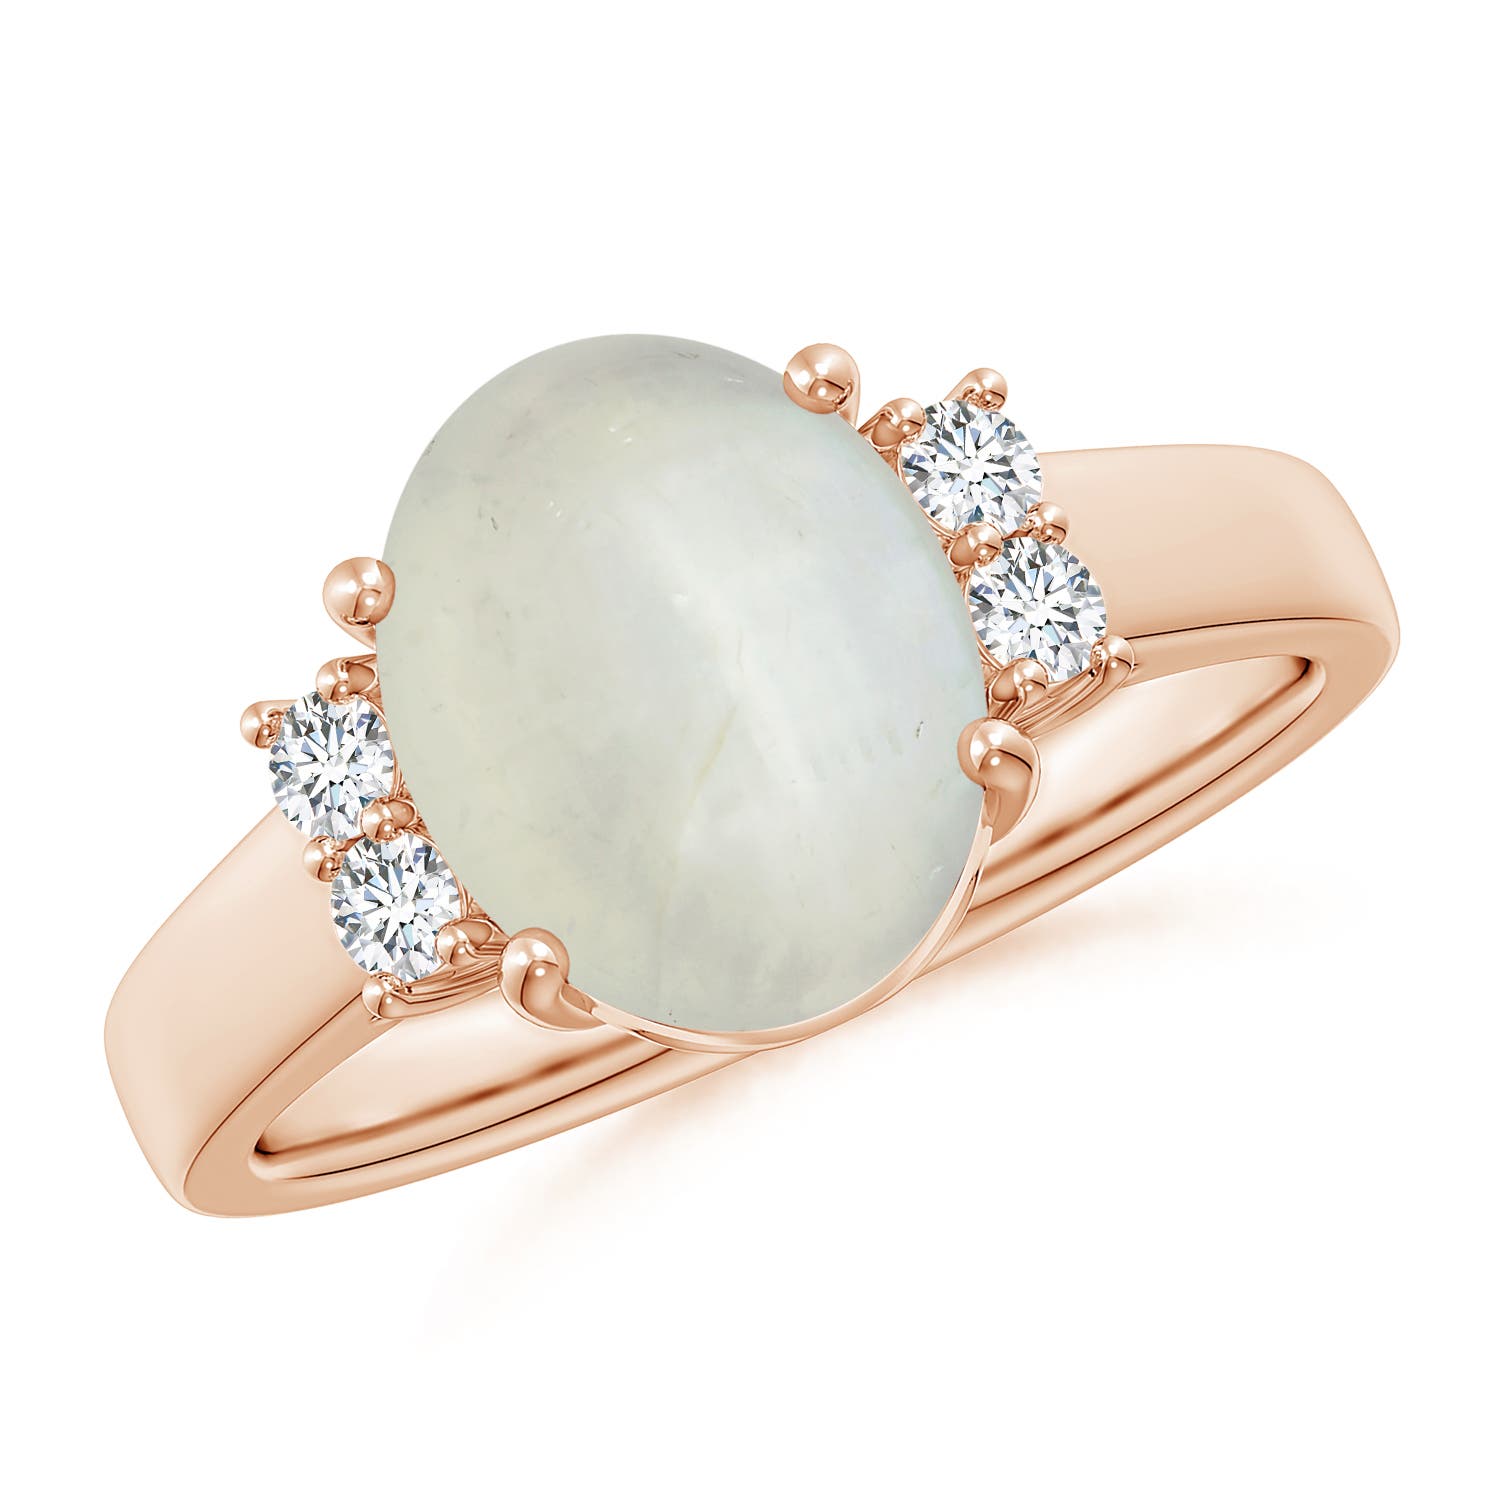 AA - Moonstone / 2.66 CT / 14 KT Rose Gold